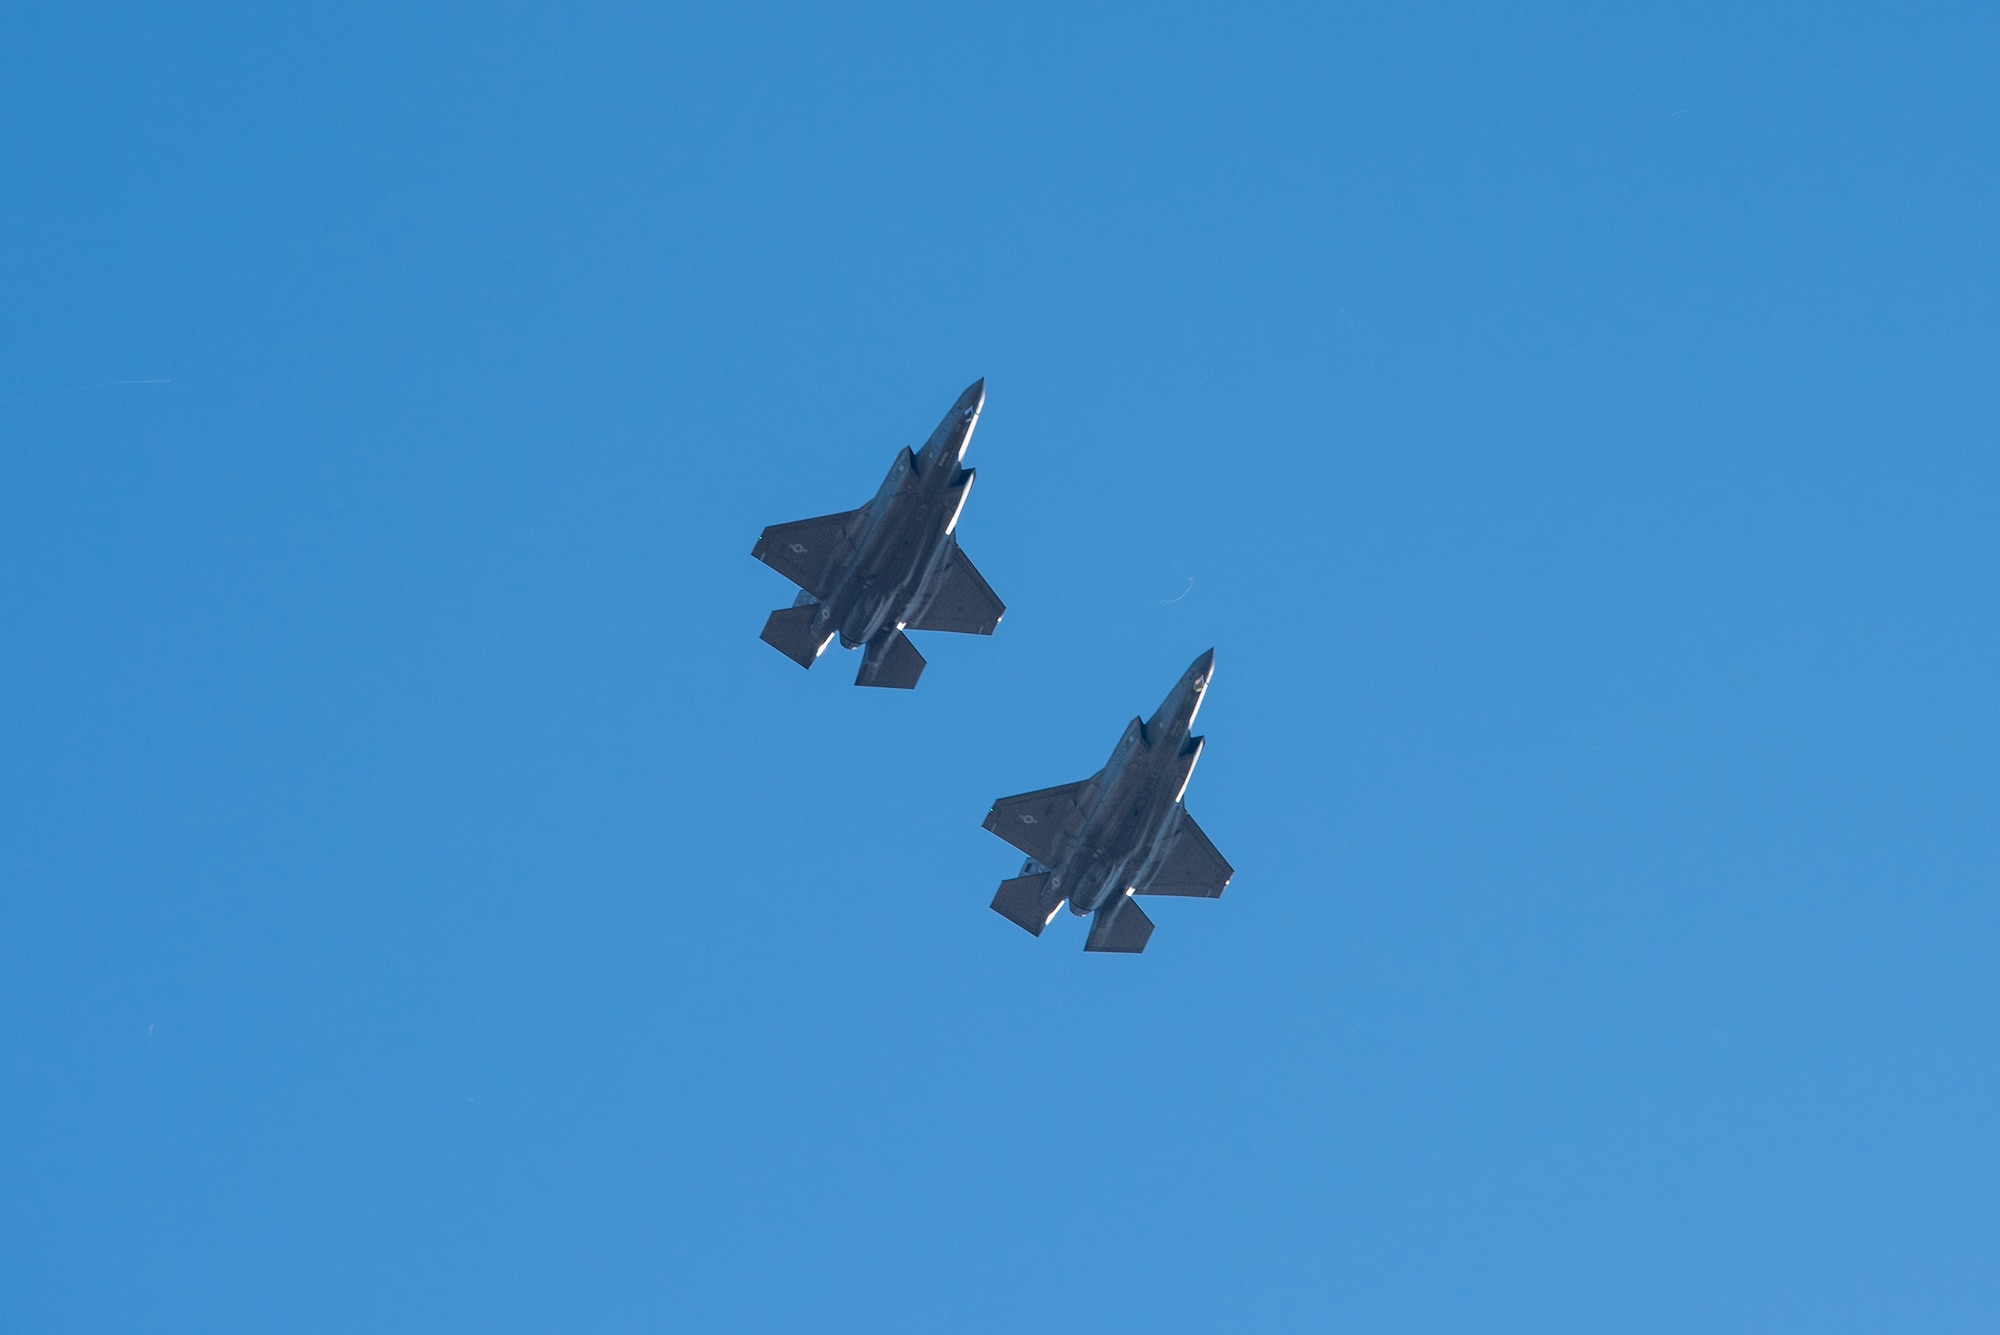 Image of two F-35A fighter jets in formation. looking up at the bottom of the aircraft with blue sky as background.